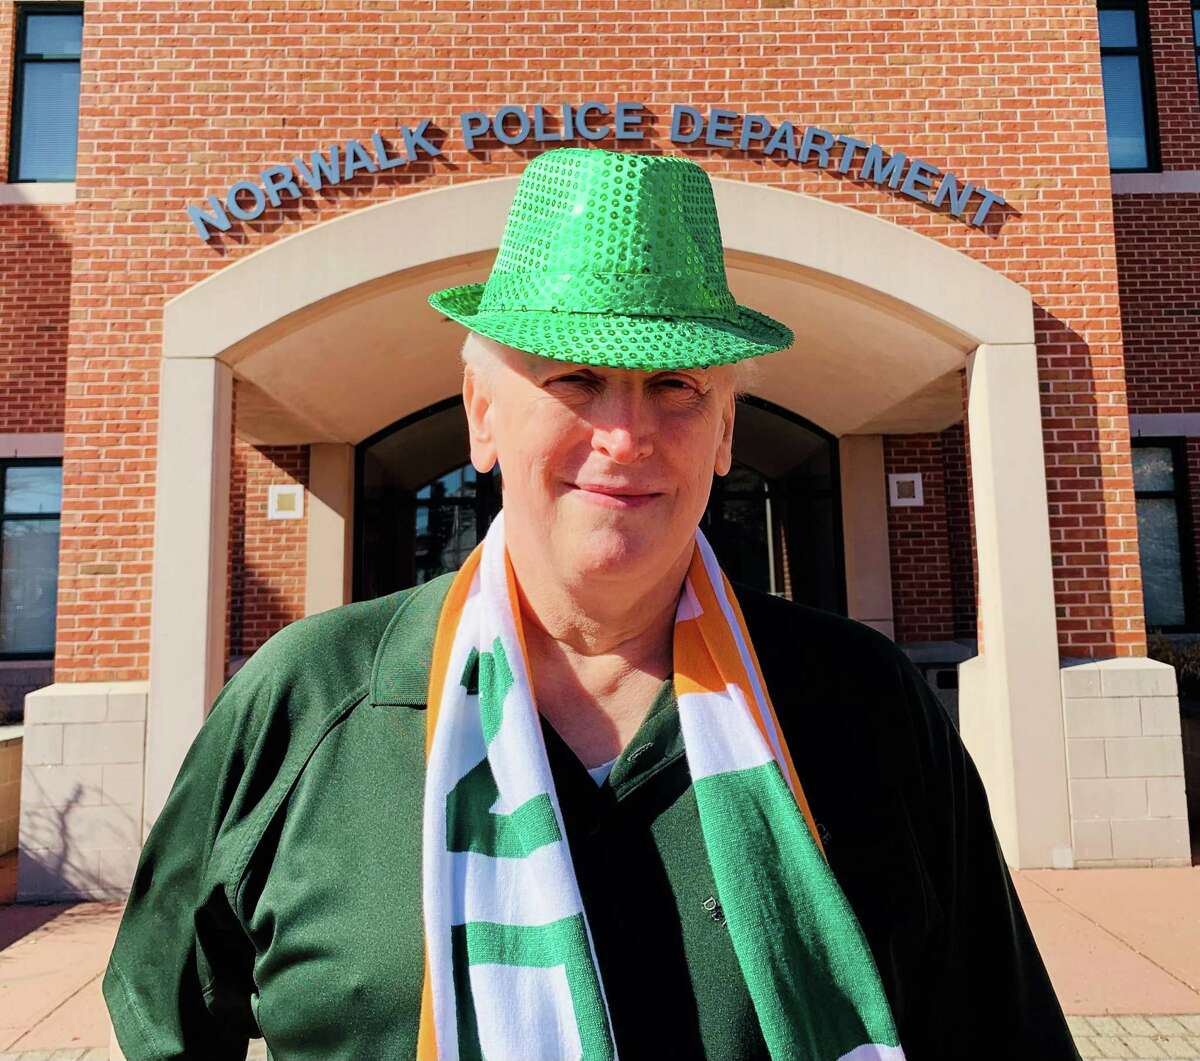 Detective William “Bill” Maloney will serve as the 2022 Norwalk Saint Patrick’s Day Parade Grand Marshal.